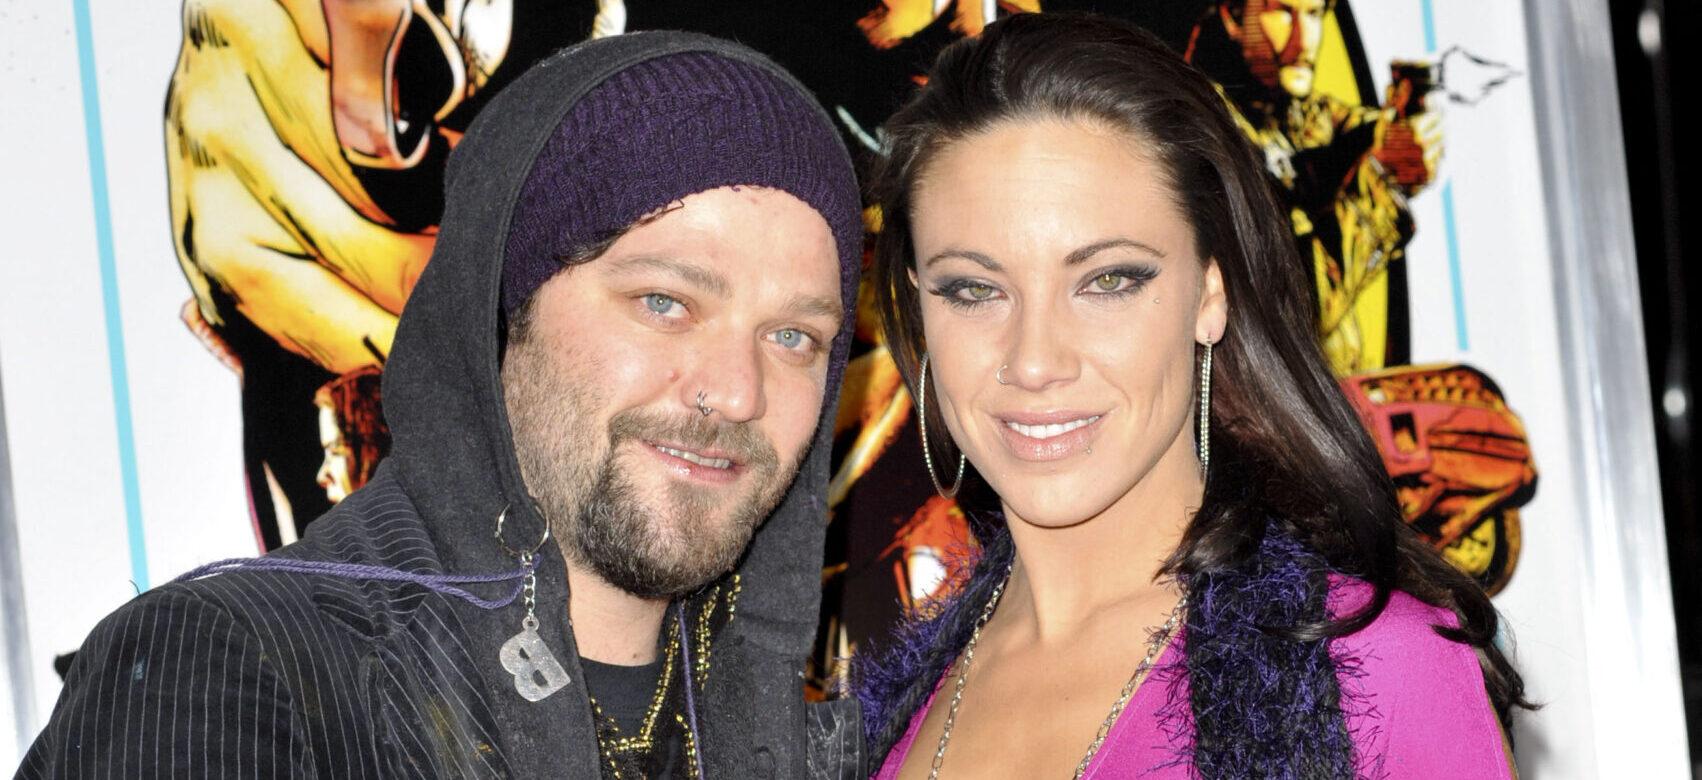 Bam Margera's Estranged Wife Slams Claim By The Actor That They Were 'Never Legally Married'